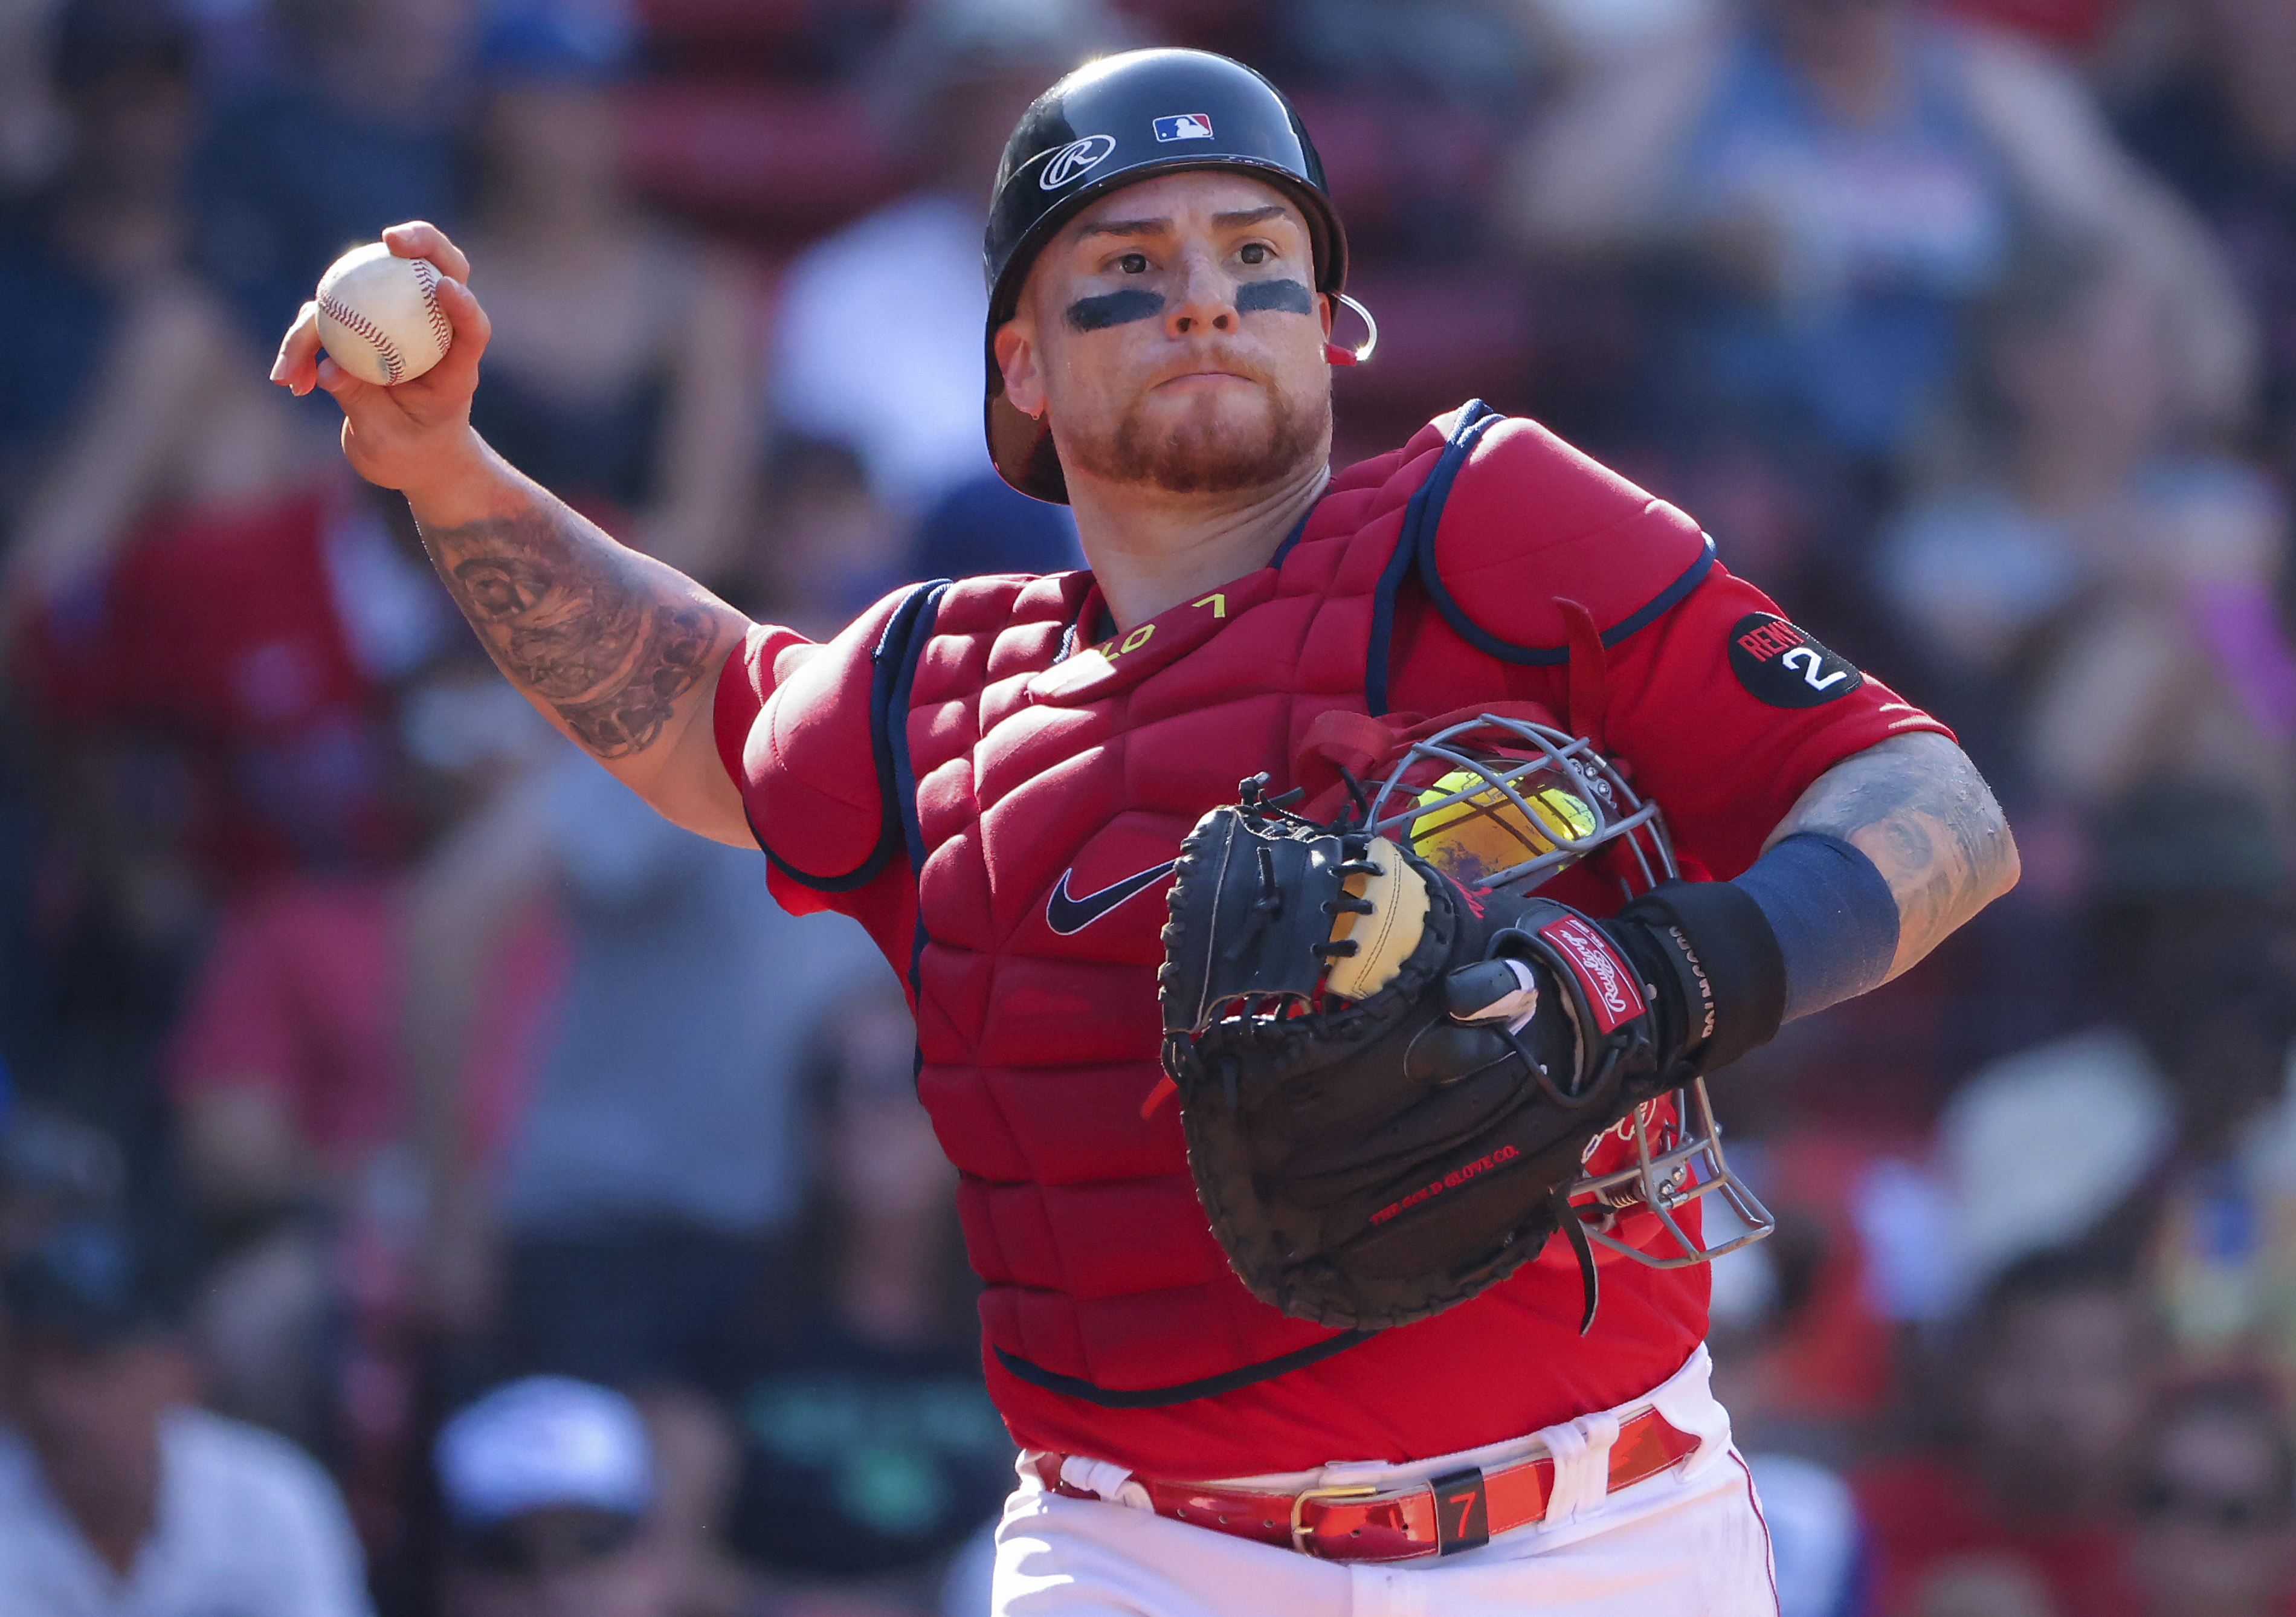 Bernie: The Catching Search Continues: Today's Candidate, Christian Vazquez.  - Scoops